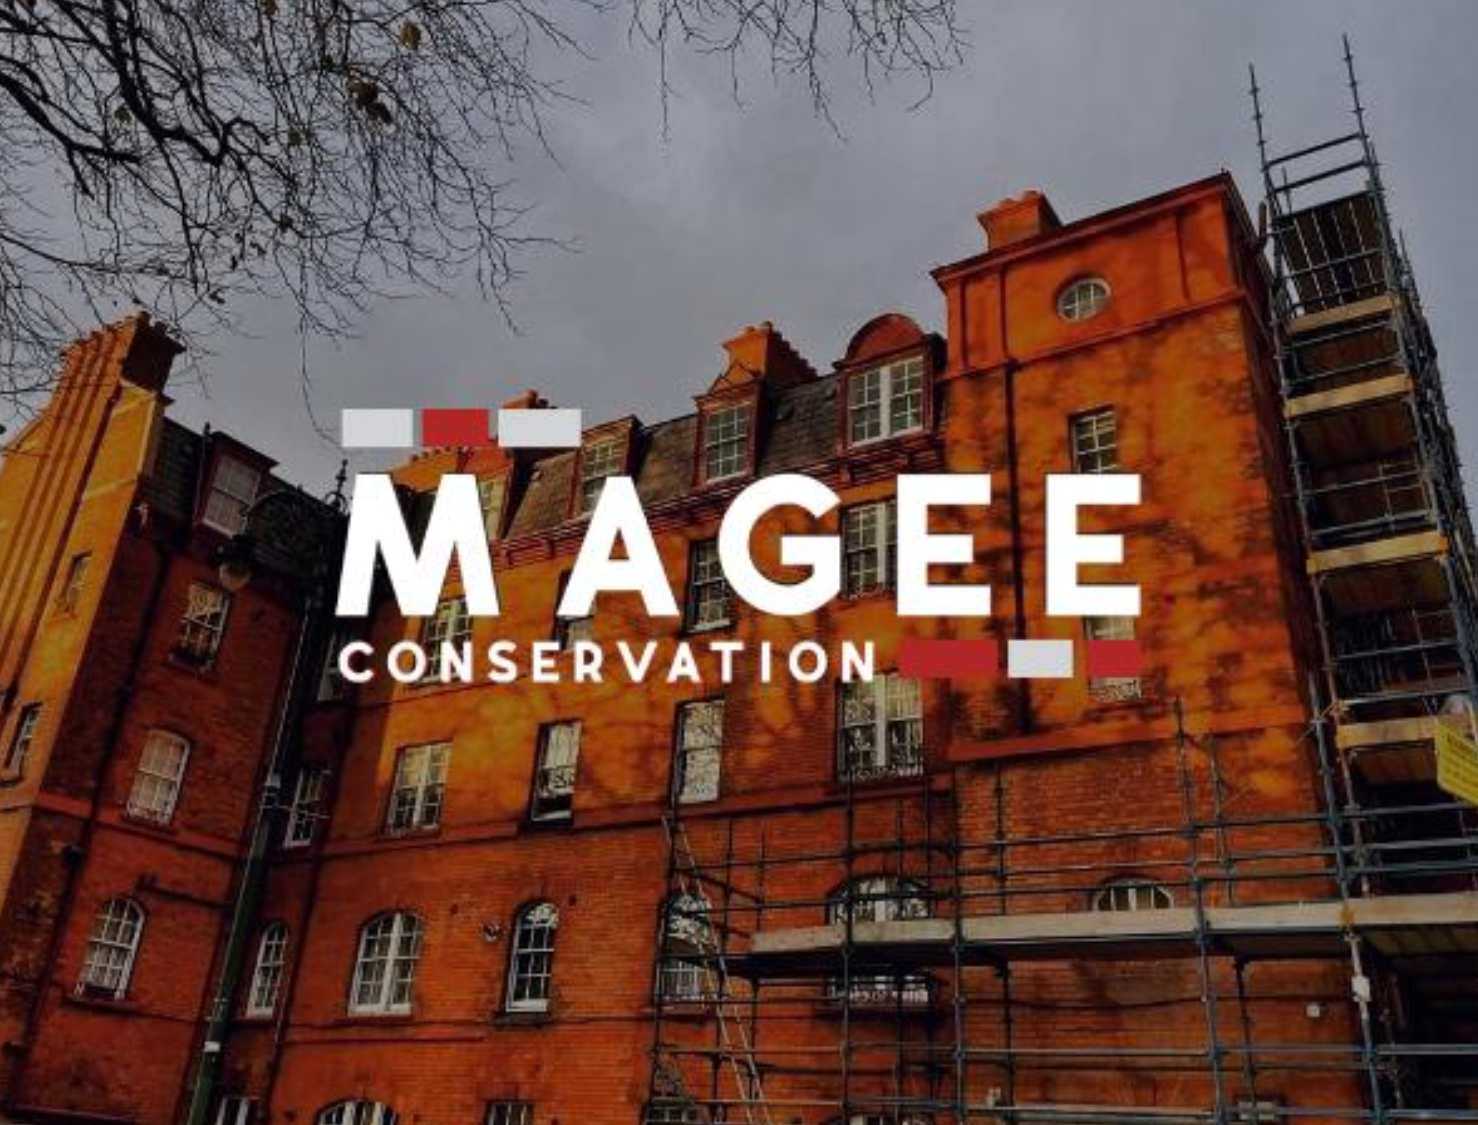 Magee conservation